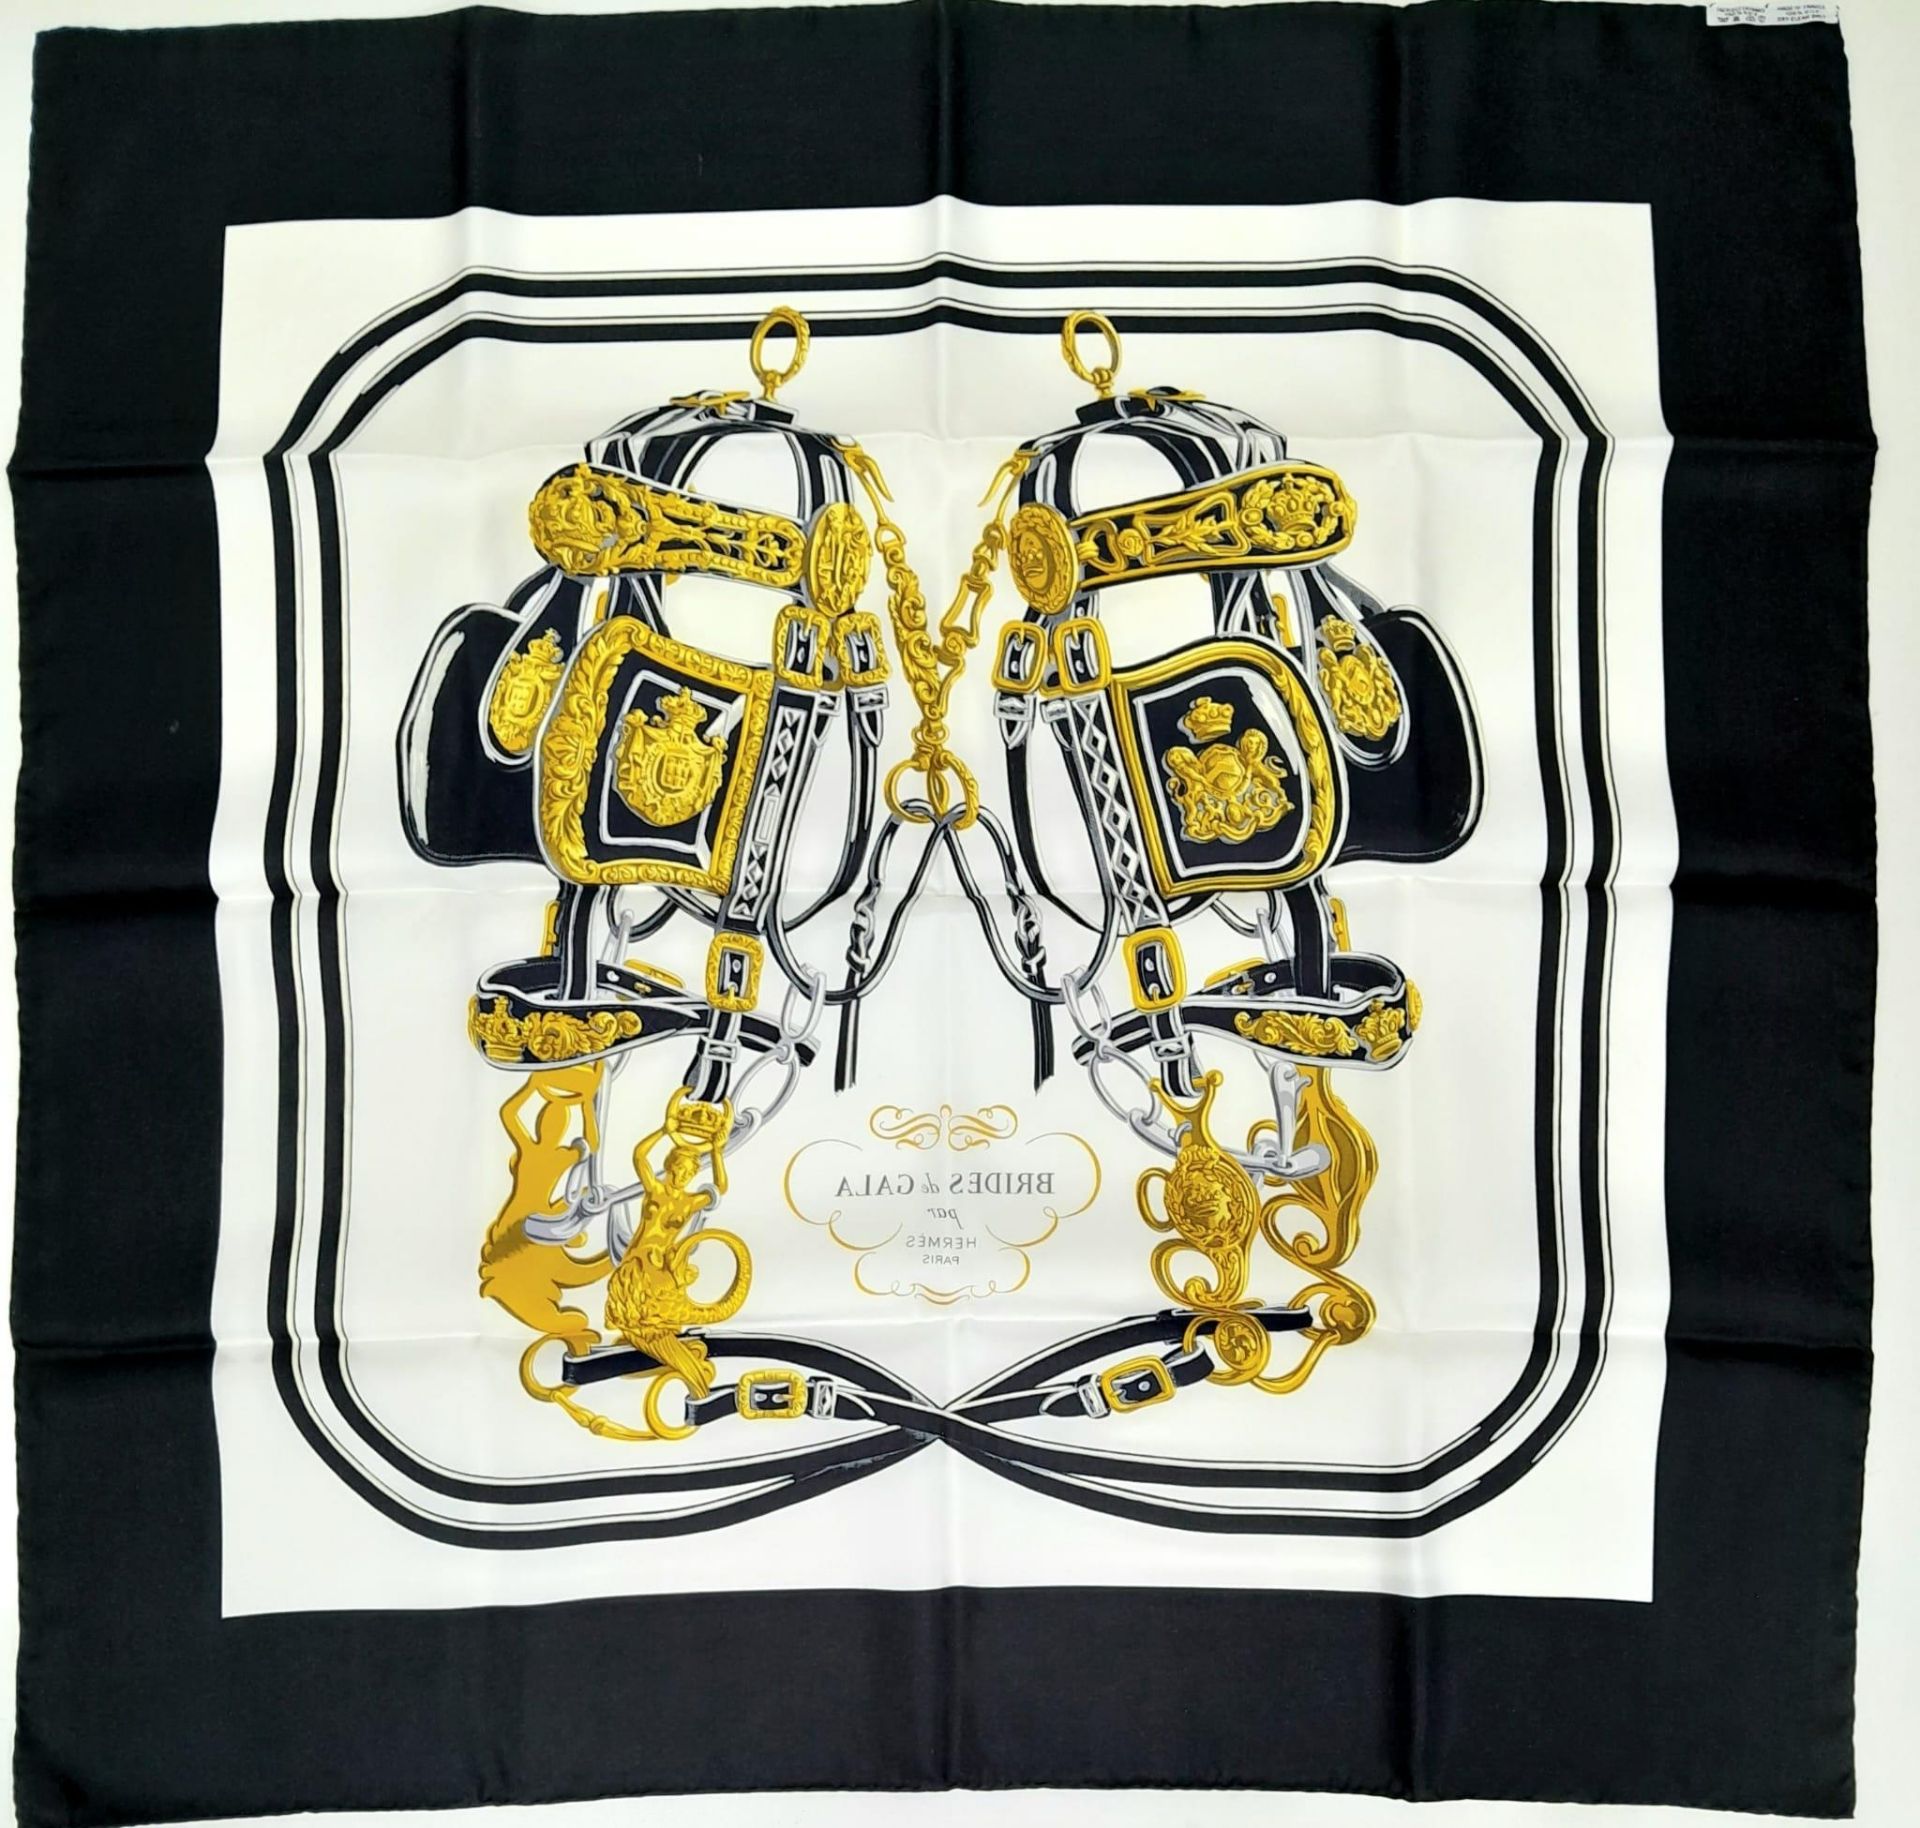 A Hermes Carre Silk Scarf "Brides de Gala" in Black, White and Gold Equestrian Print, features a - Image 3 of 5